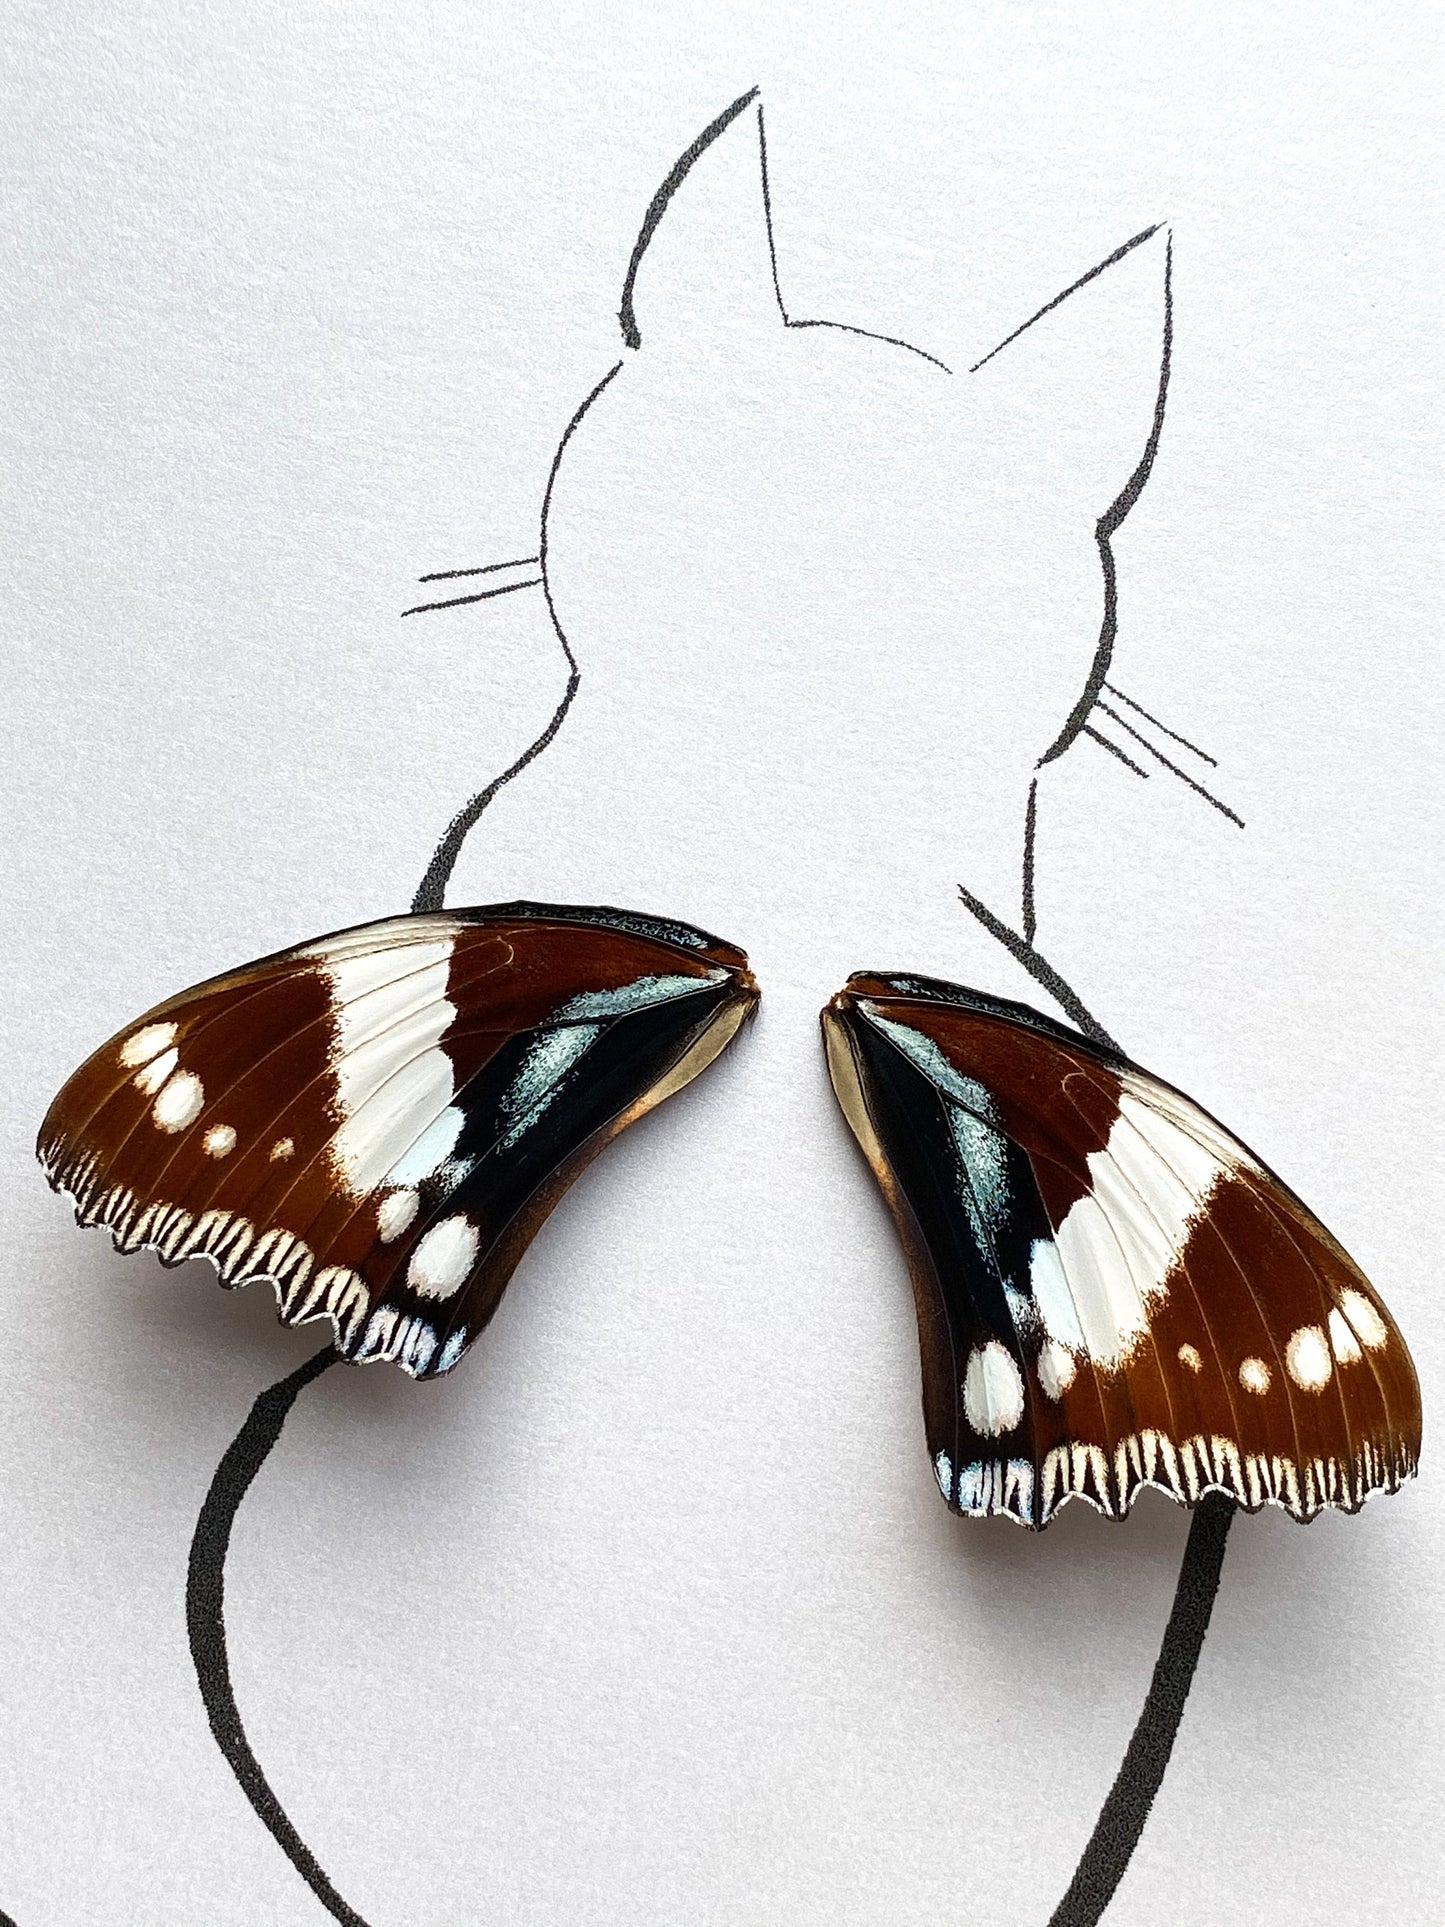 Cat with Butterfly Wings Framed Illustration Wing From and For Conservation